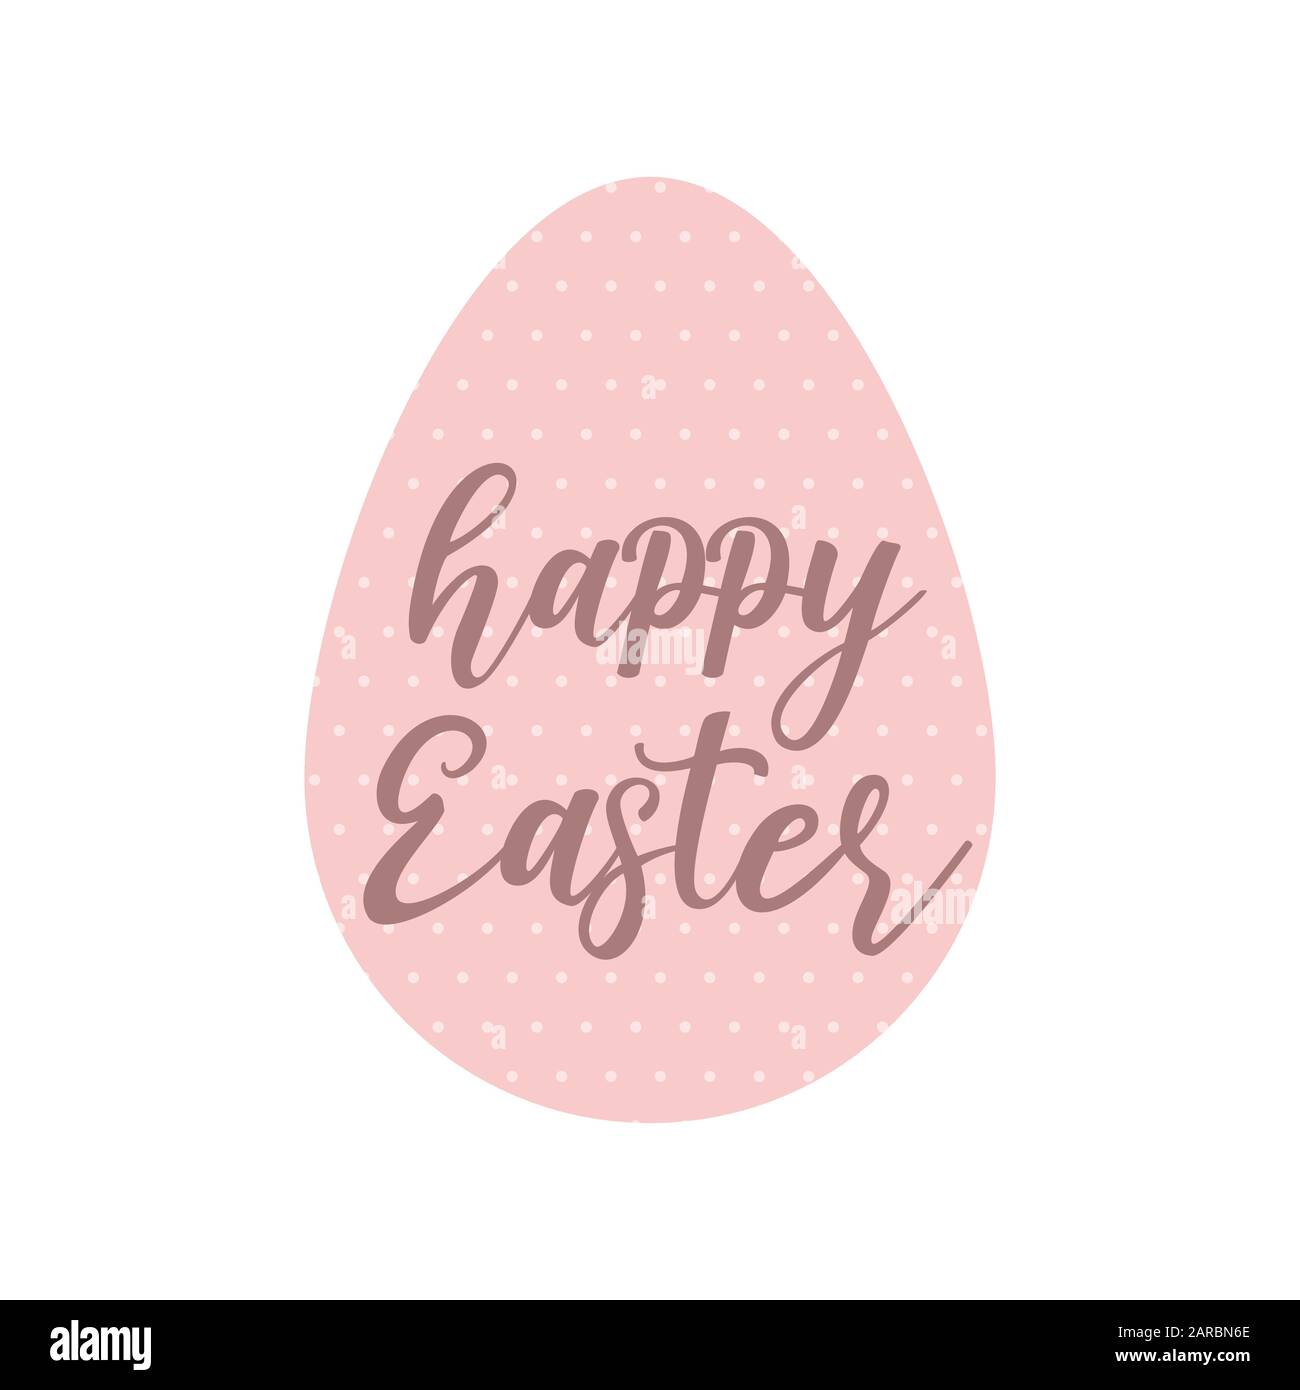 Happy Easter icon, vector illustration. Lettering over egg shaped icon Stock Vector